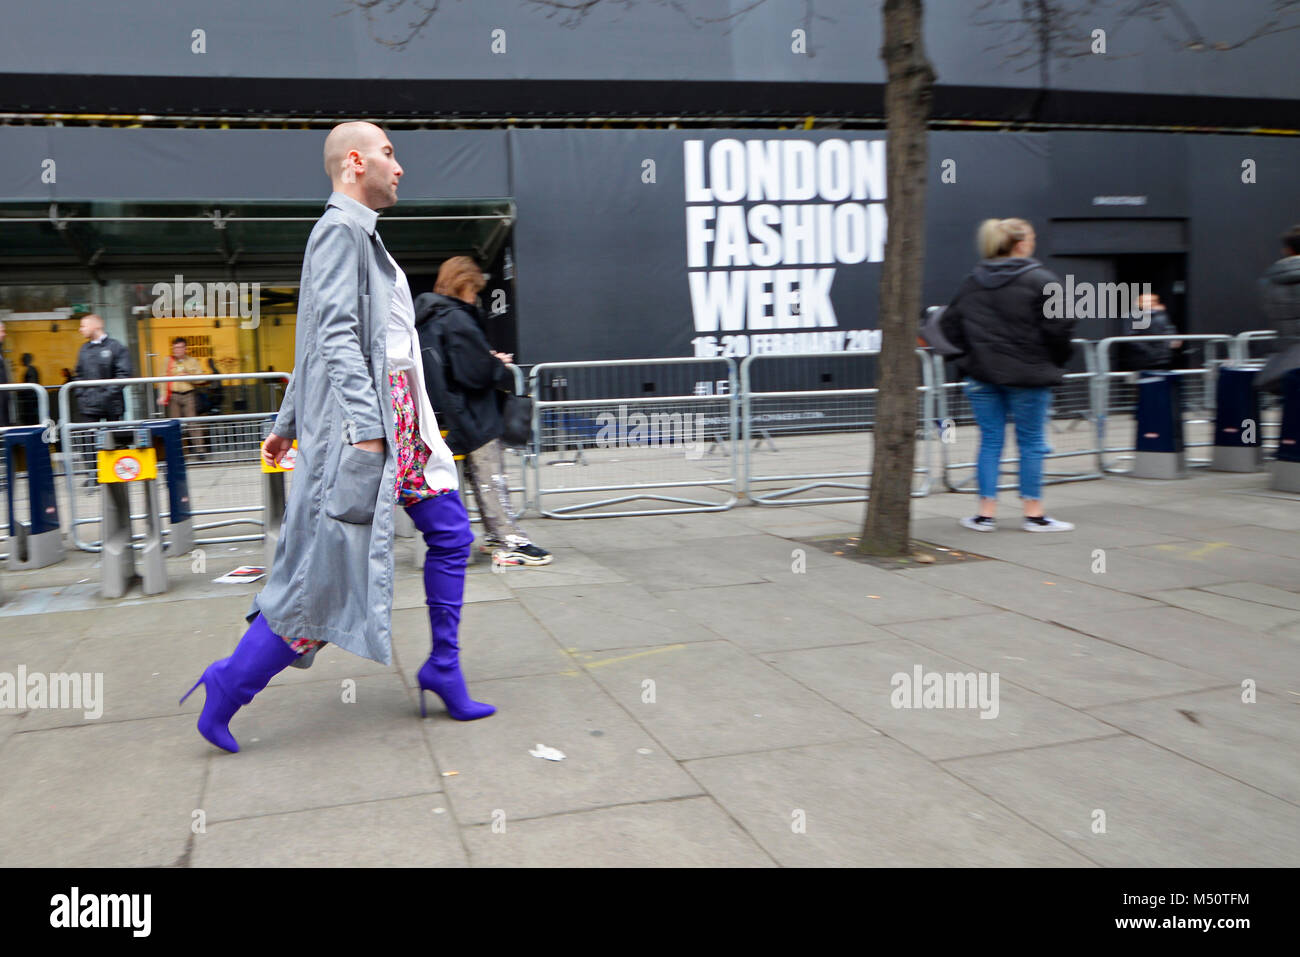 Are high heels back? No, it's just London fashion week, Women's shoes